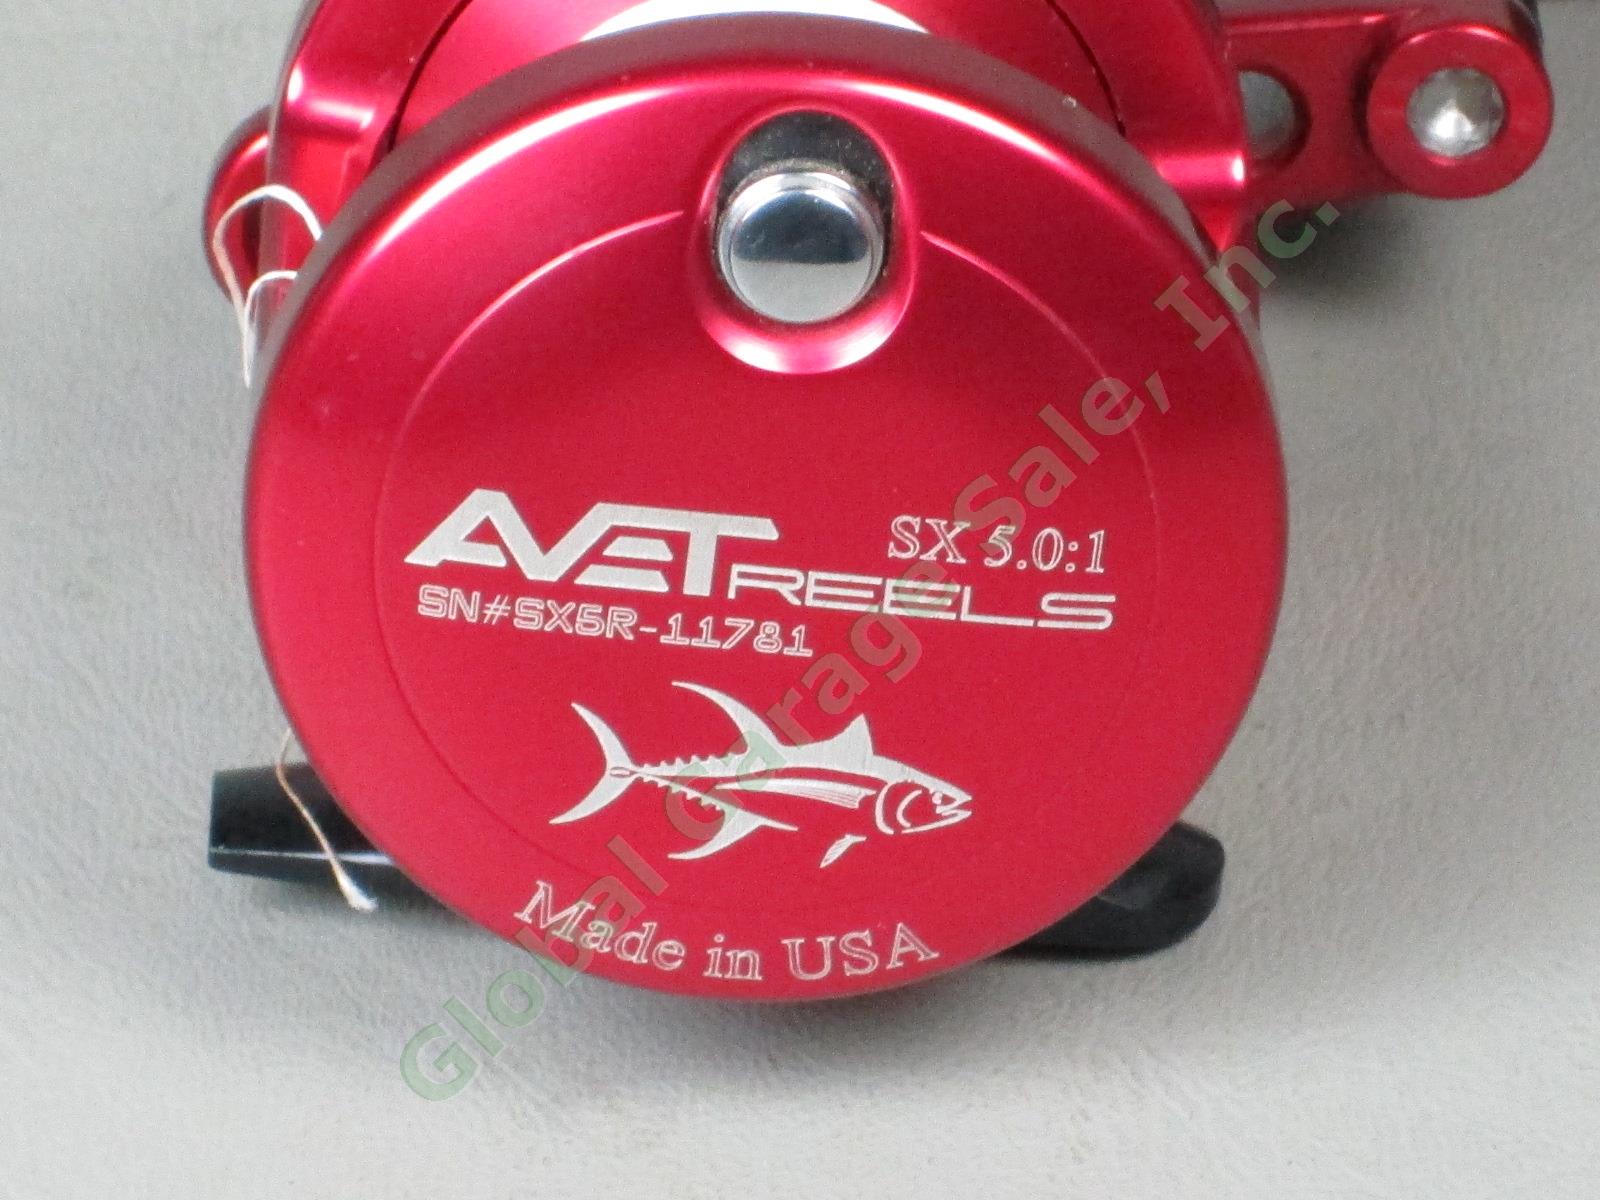 Avet SX 5.0:1 Lever Drag Saltwater Fishing Reel Made In USA Red Near Mint! NR! 5